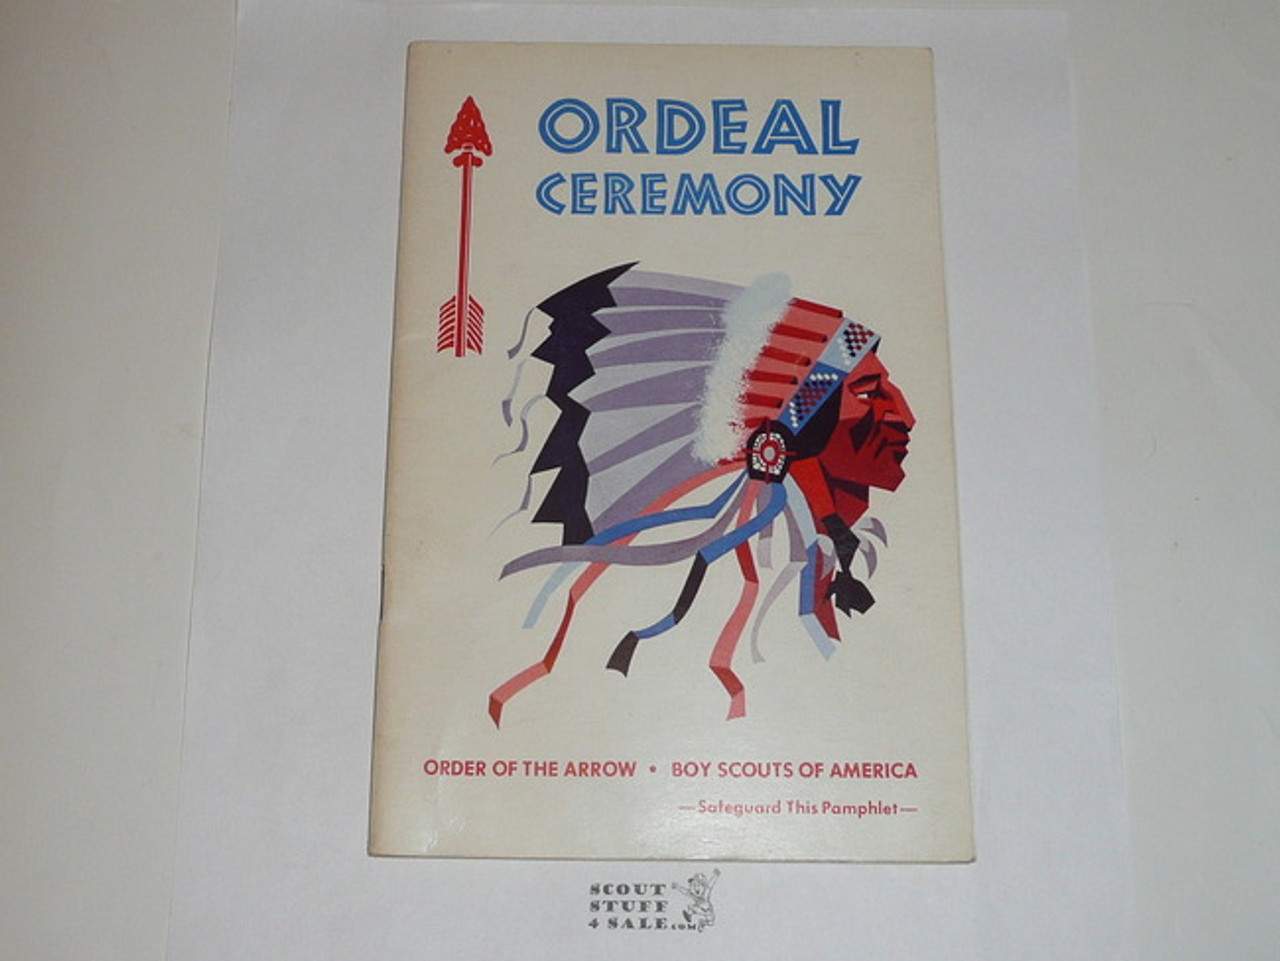 Ordeal Ceremony Manual, Order of the Arrow, 1973, 2-73 Printing